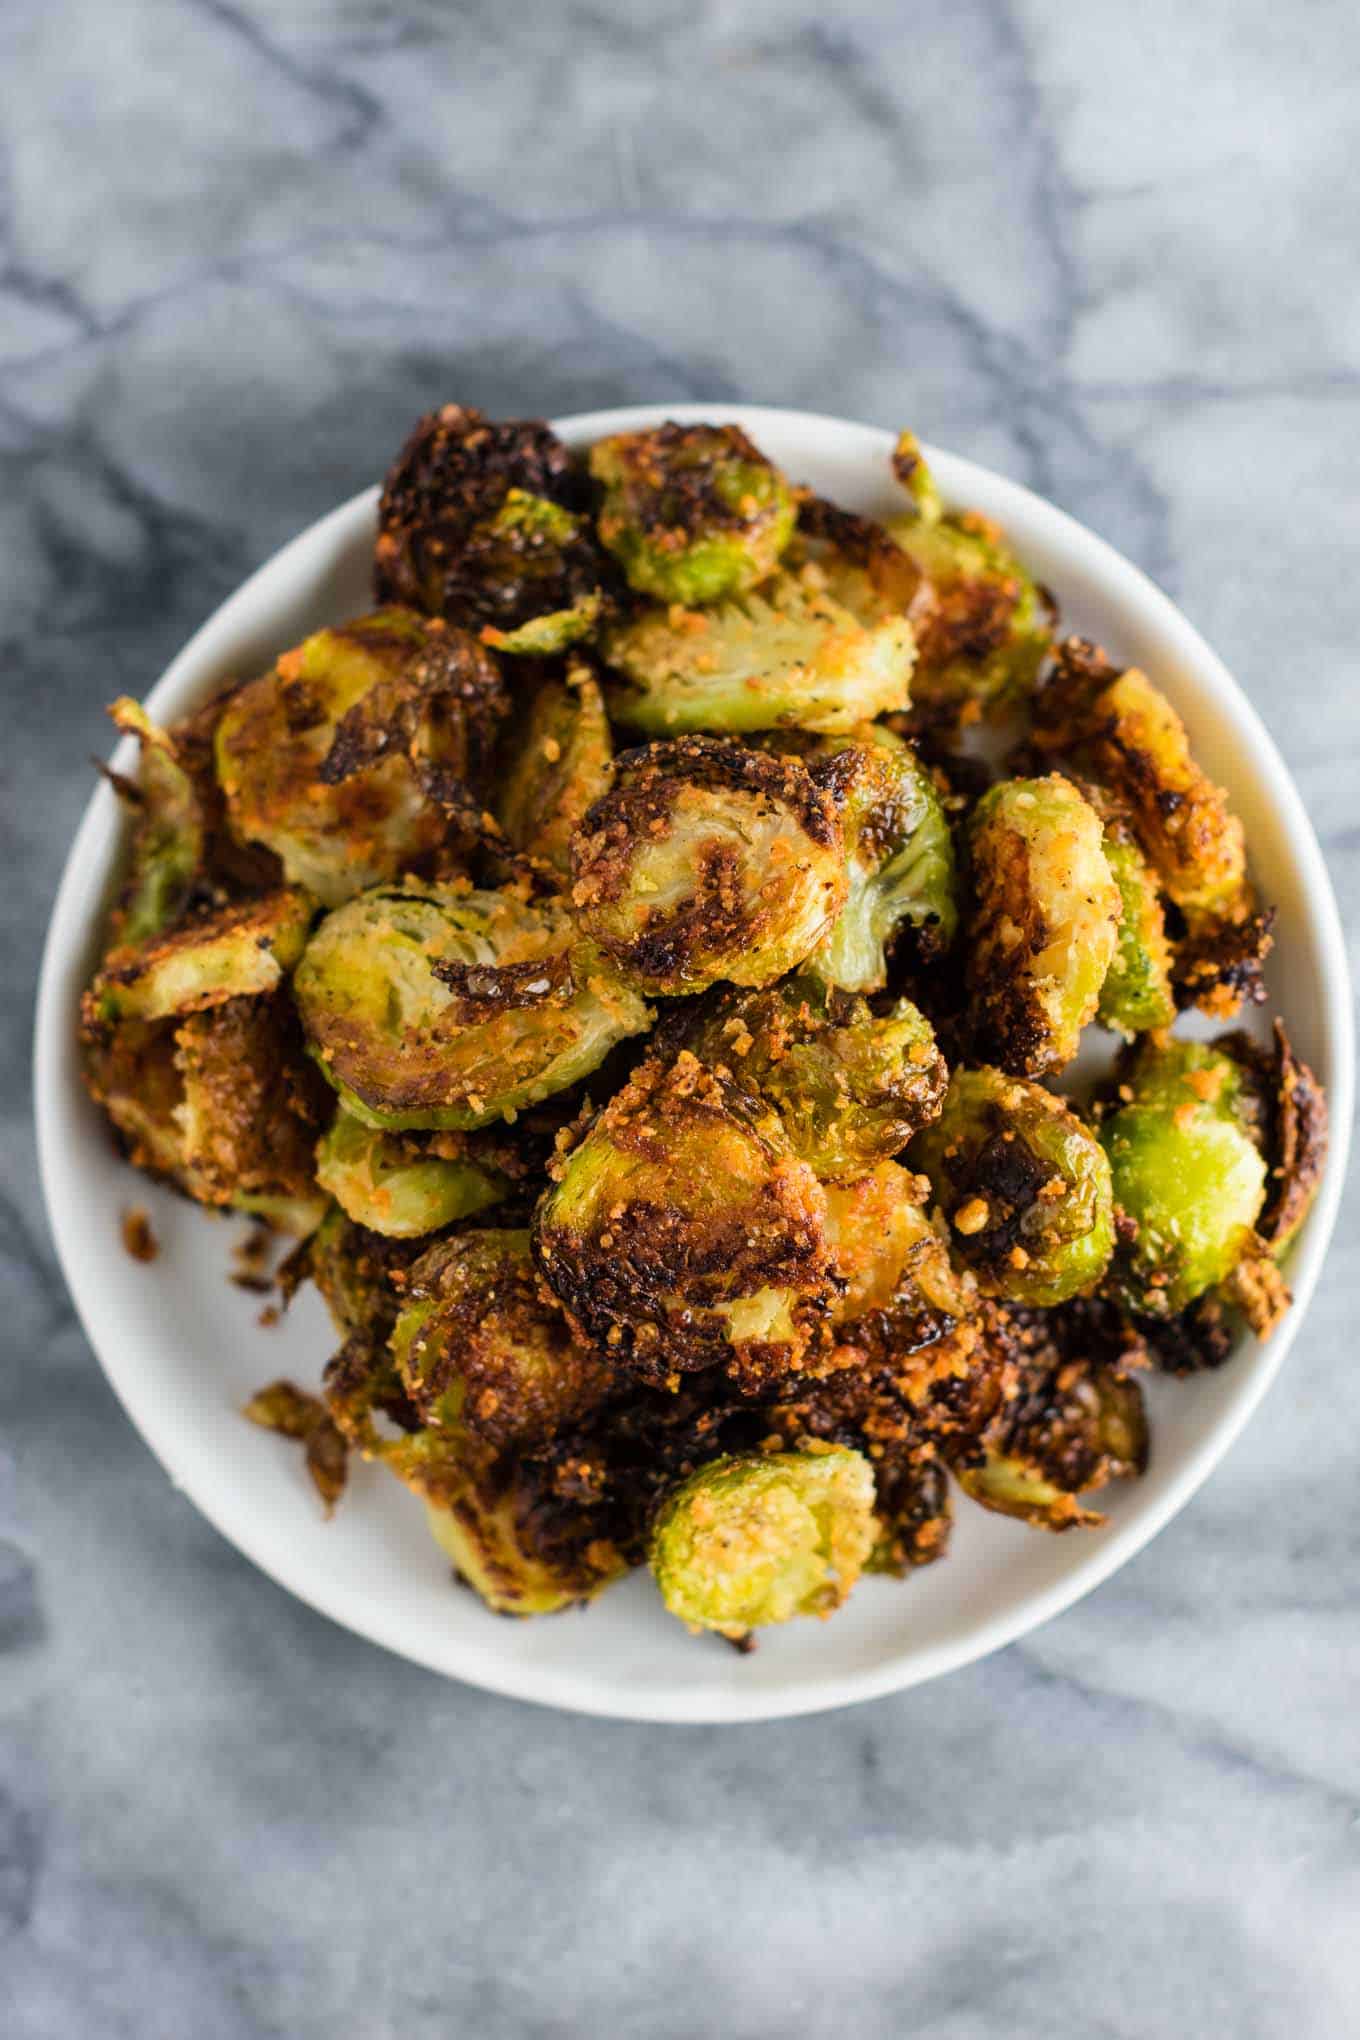 brussel sprout chips recipe - these are so good I could eat the whole pan myself! #brusselsprouts #brusselsproutchips #dinner #sidedish #vegetarian